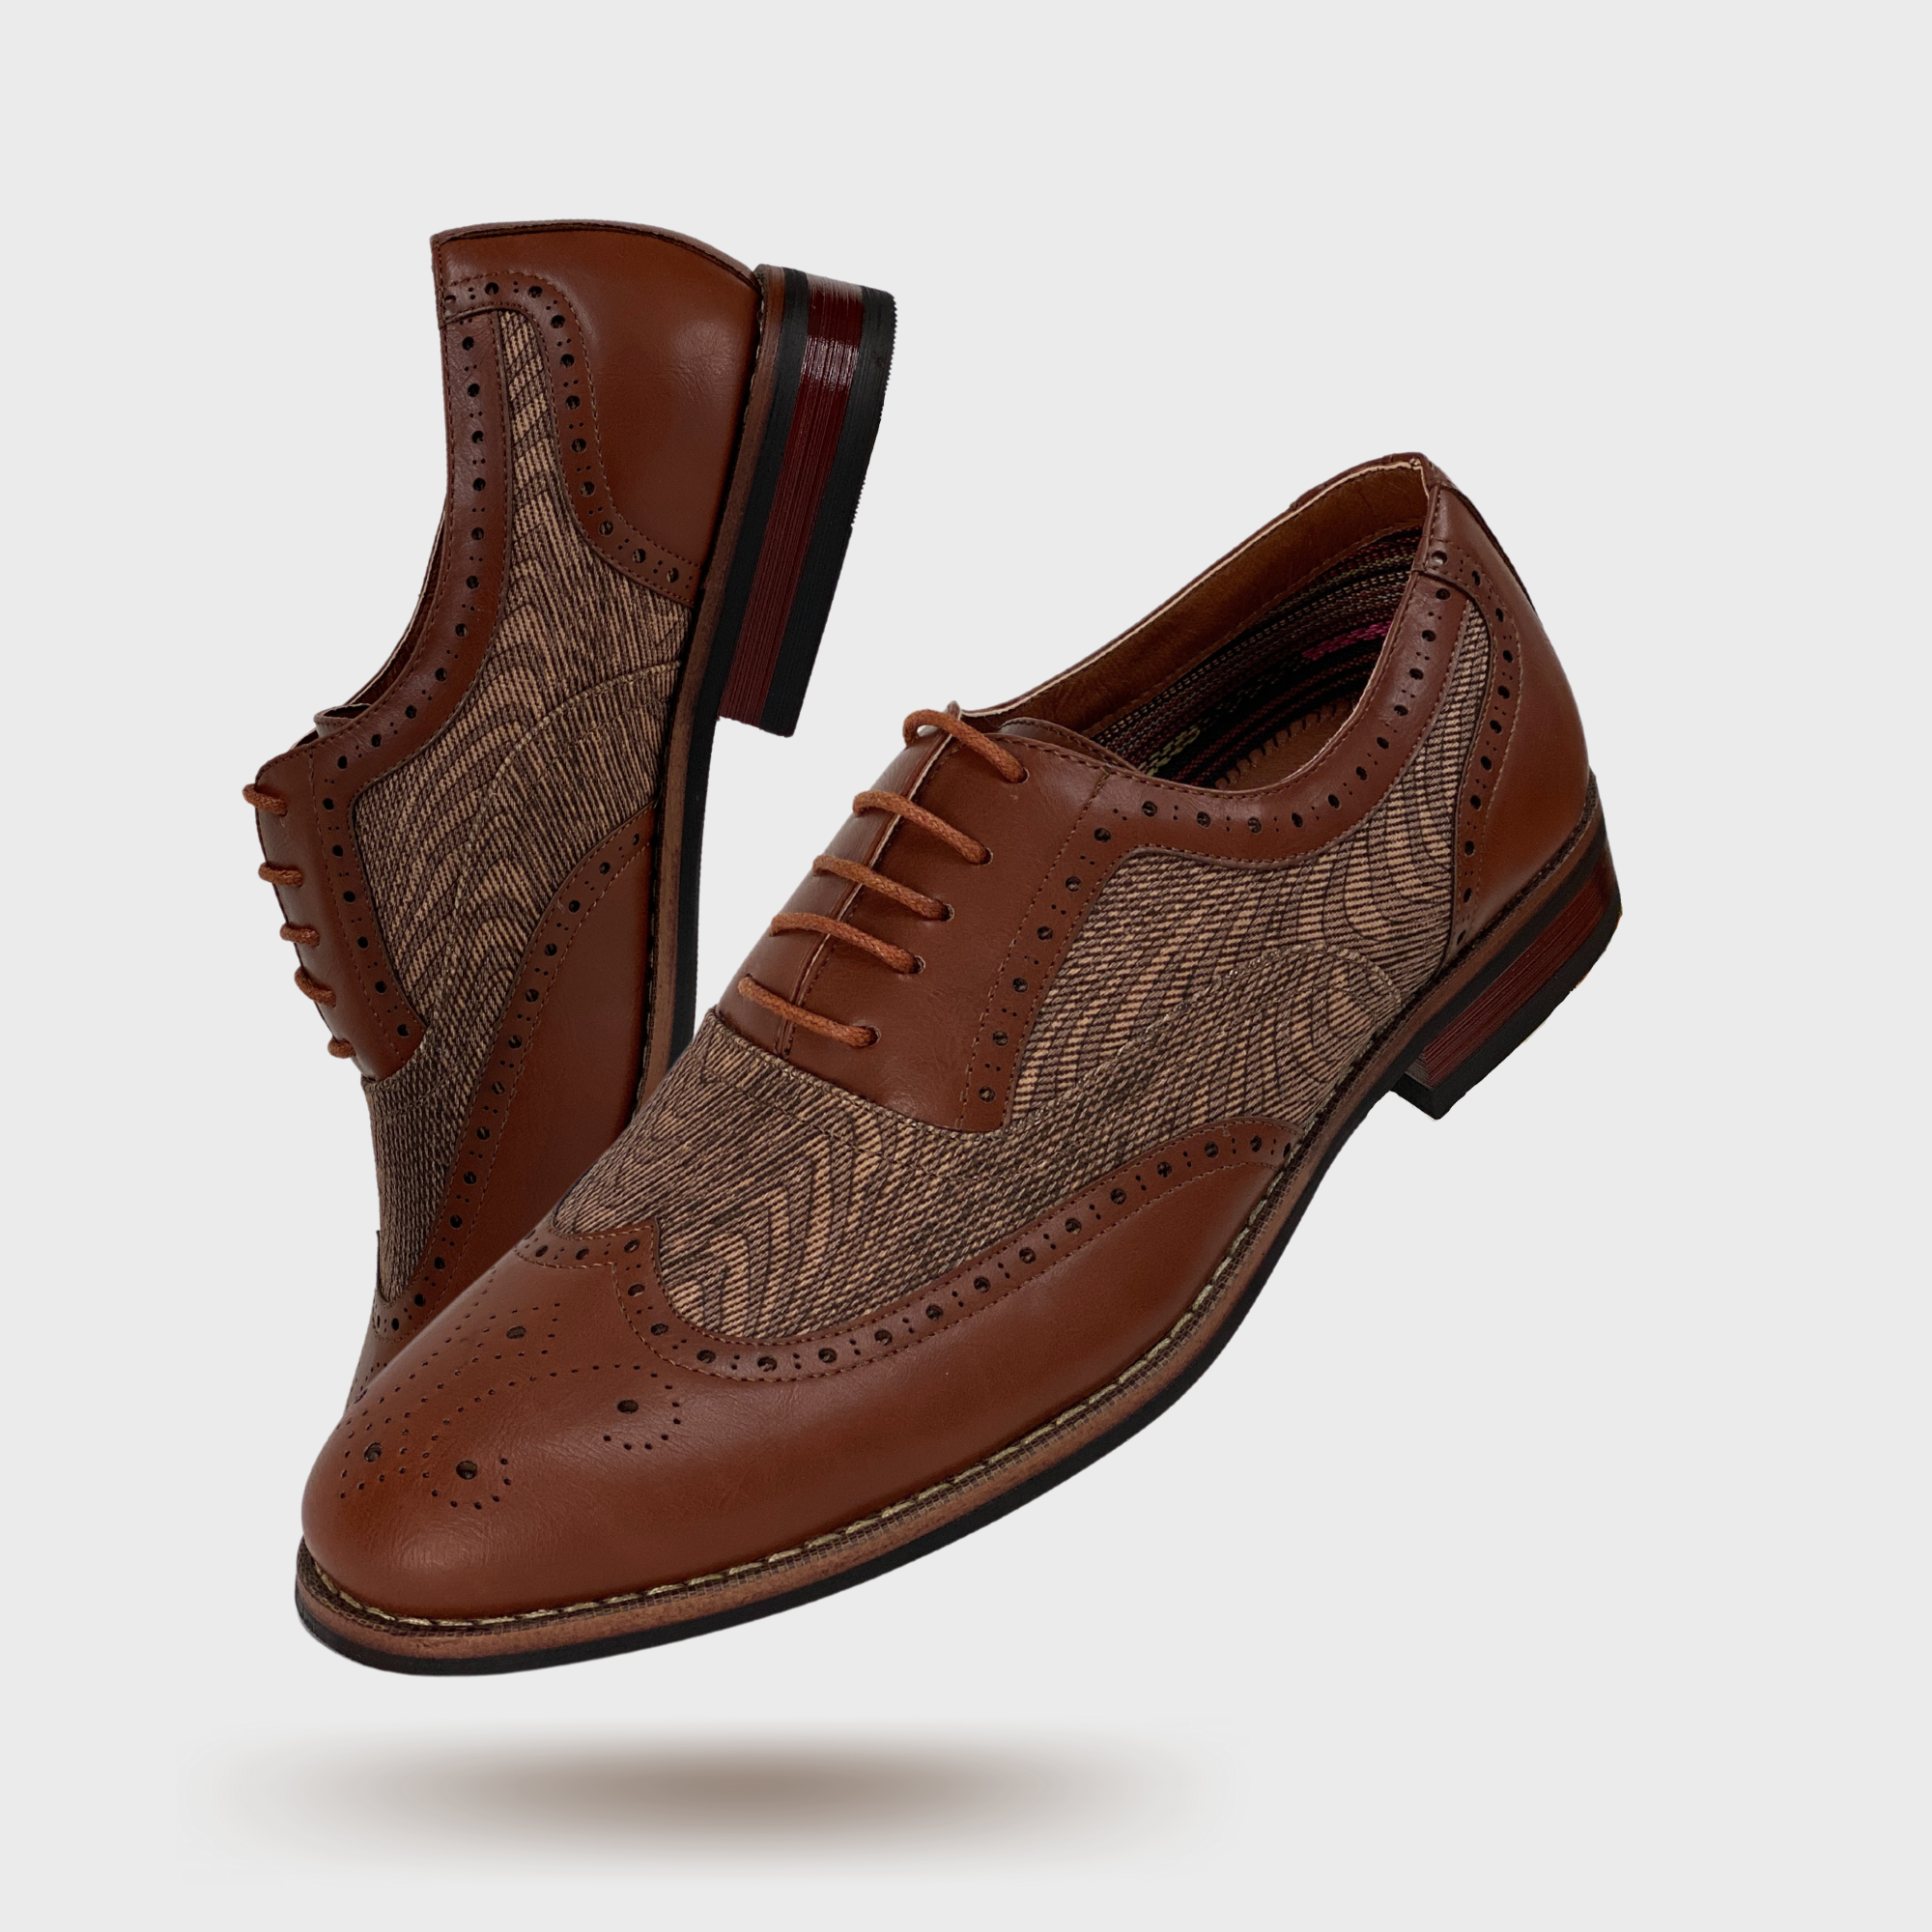 The Perfect Brogue Shoes for Your Wardrobe | ALAN | Duo-texture Brogue Dress Shoe